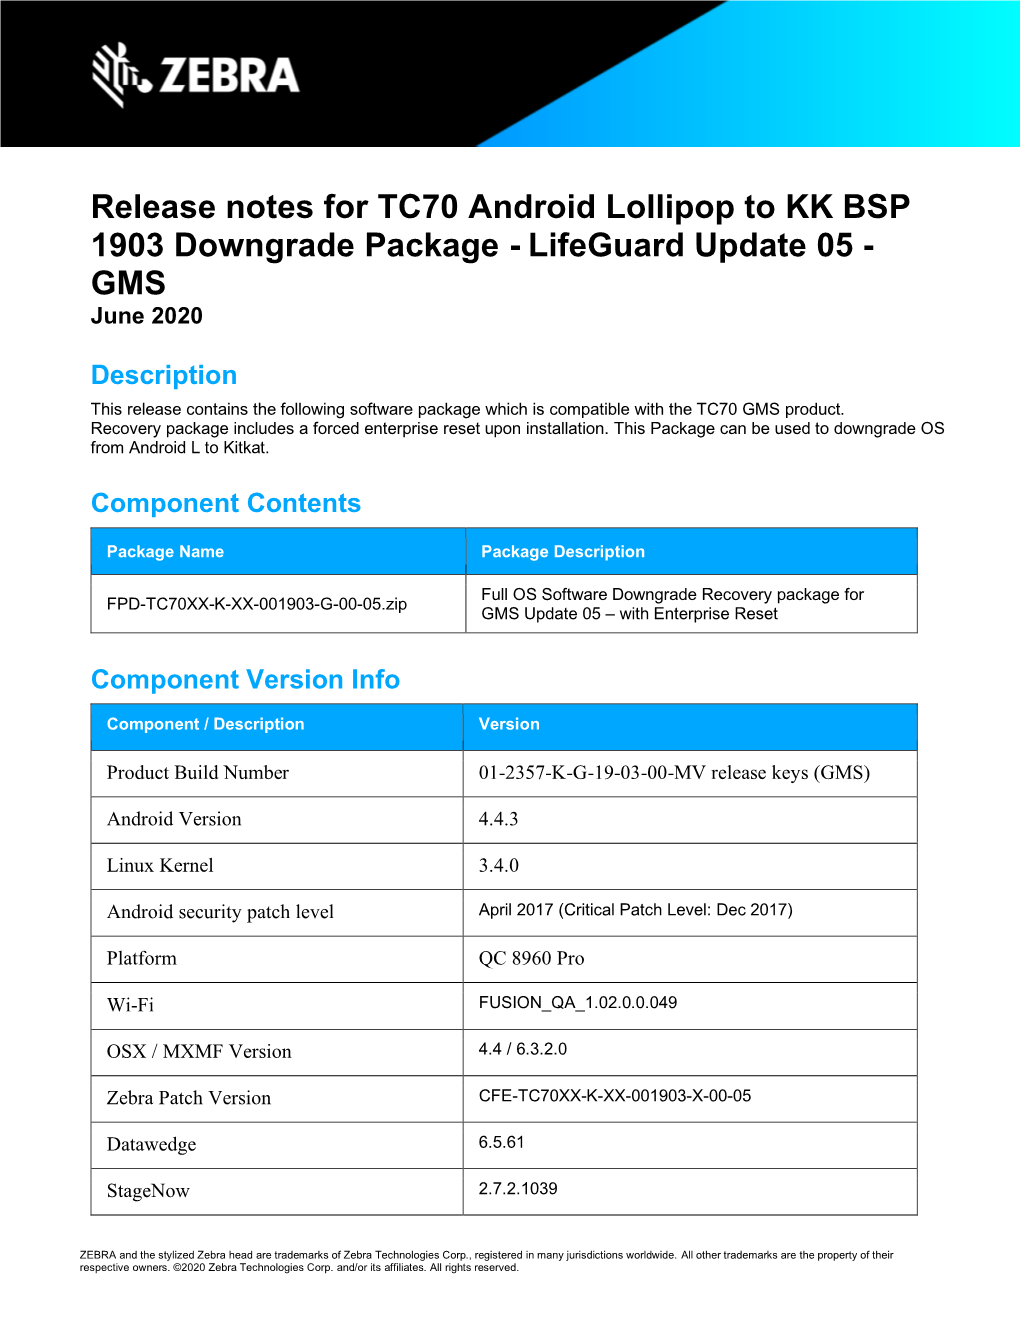 Release Notes for TC70 Android Lollipop to KK BSP 1903 Downgrade Package - Lifeguard Update 05 - GMS June 2020